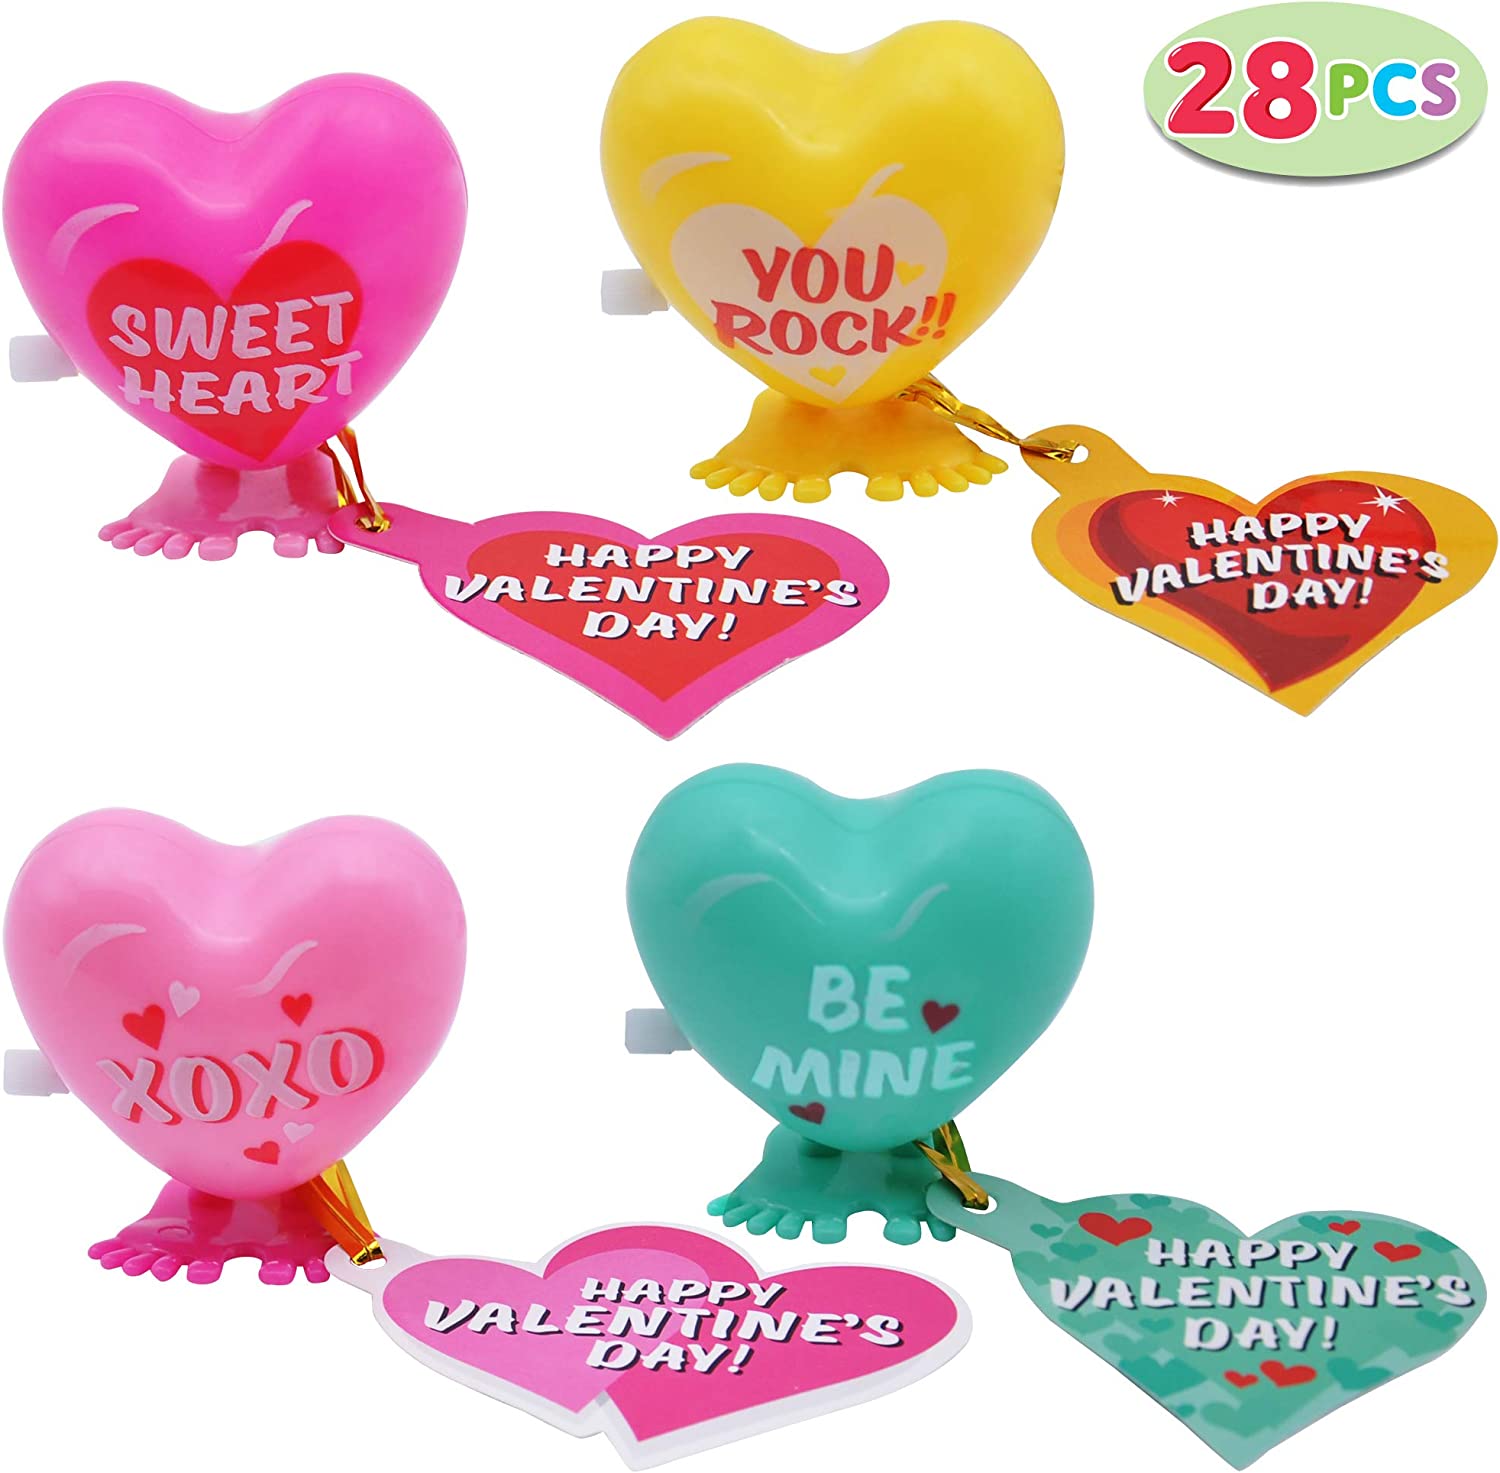 28 Pcs Wind-up Toys with Valentines Day Cards for Kids-Classroom Exchange Gifts